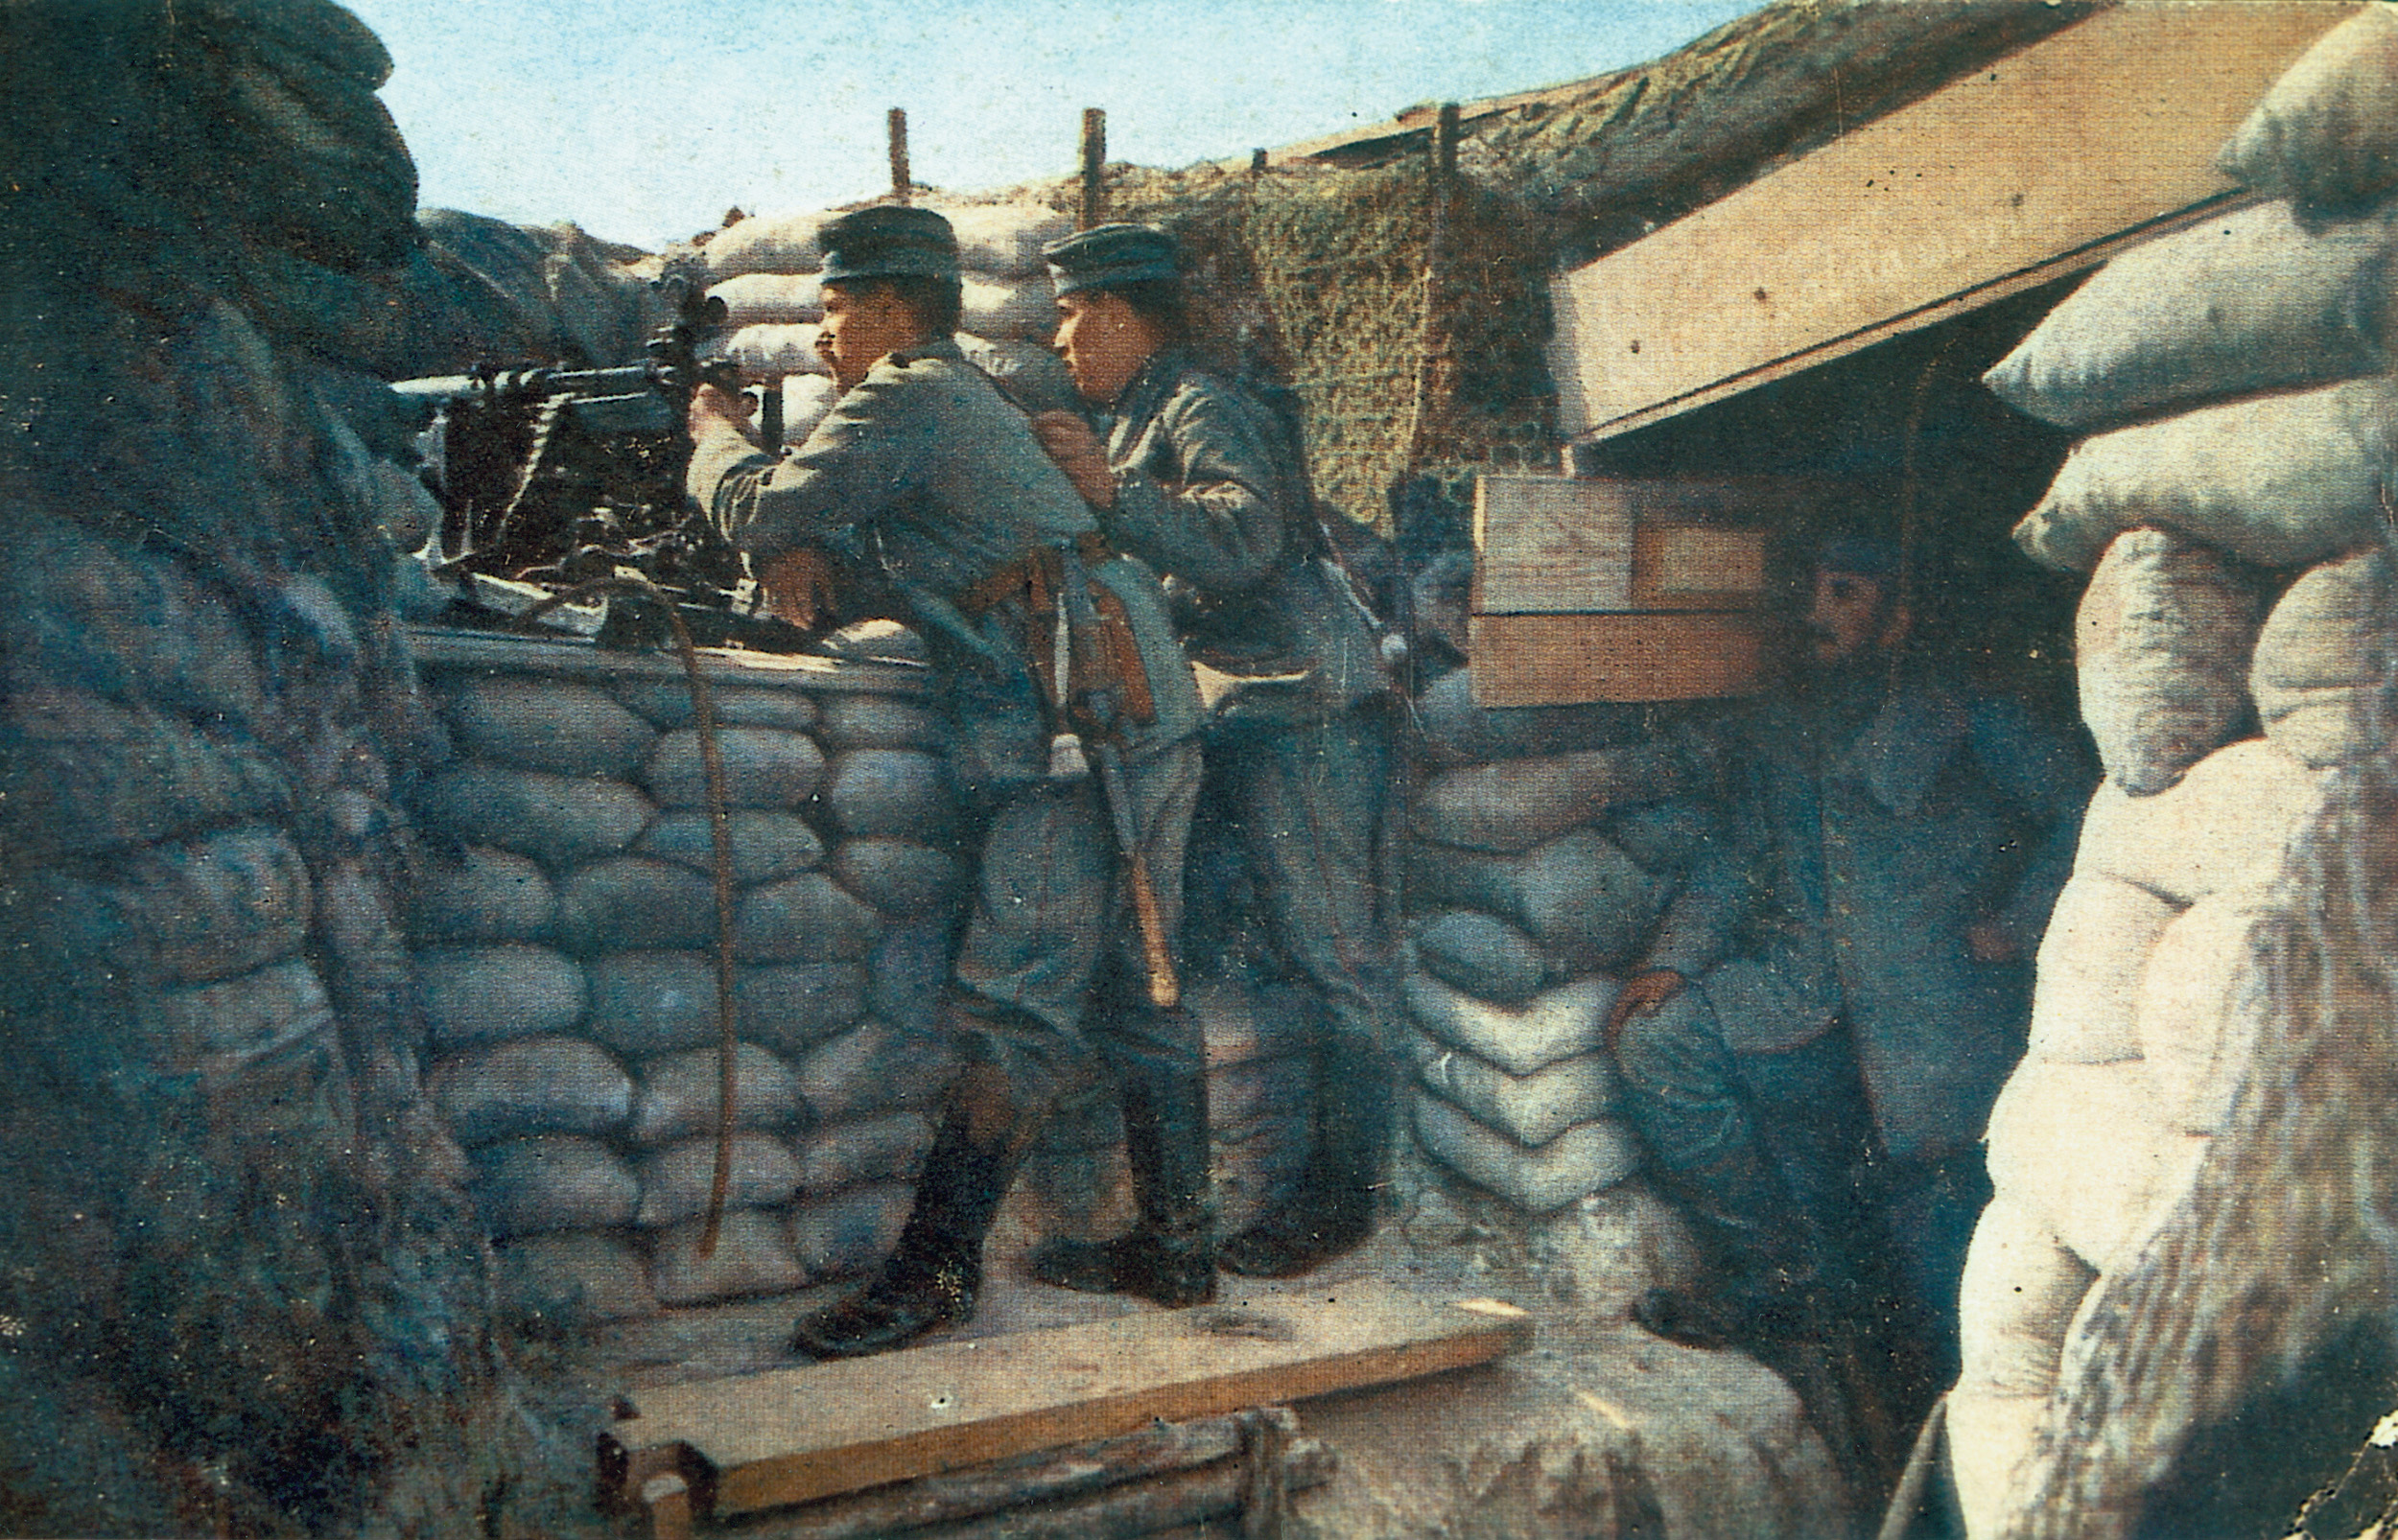 German soldiers pose for a photograph while manning a machine-gun position in a trench.